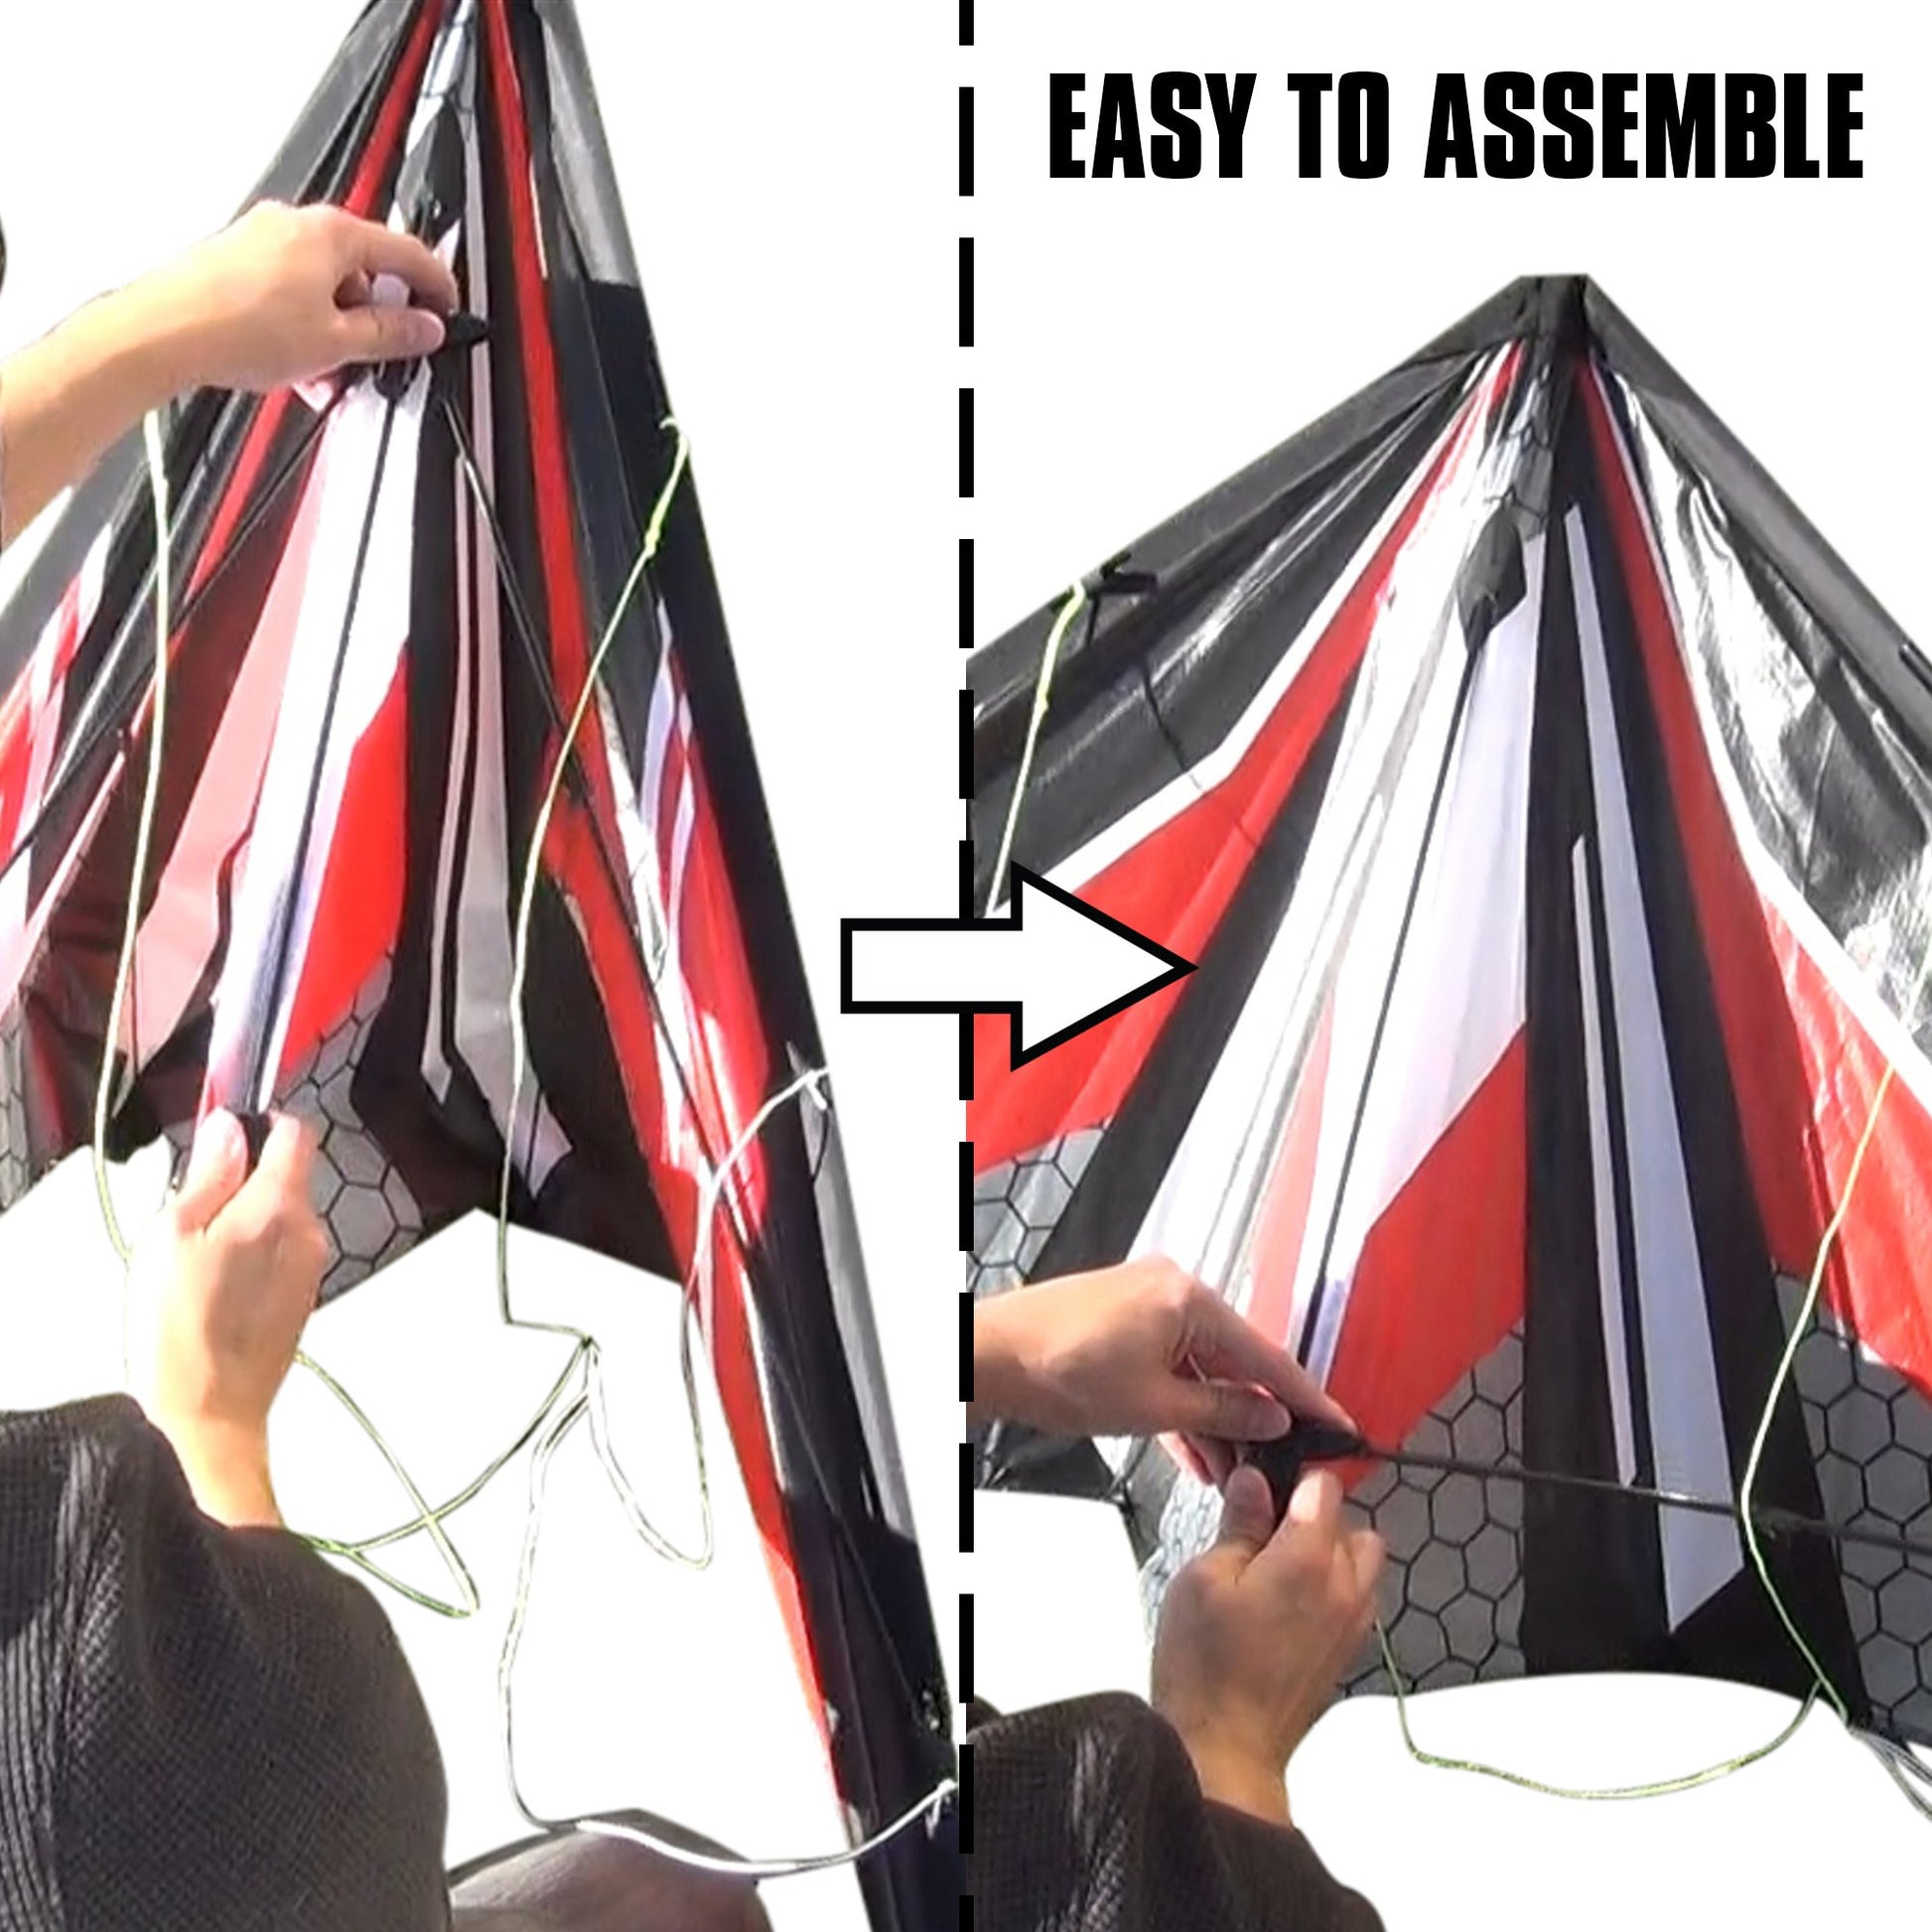 WindNSun EZ Sport 70 Dual Control Sport Kite Red Stripe Nylon Kite packaging and contents